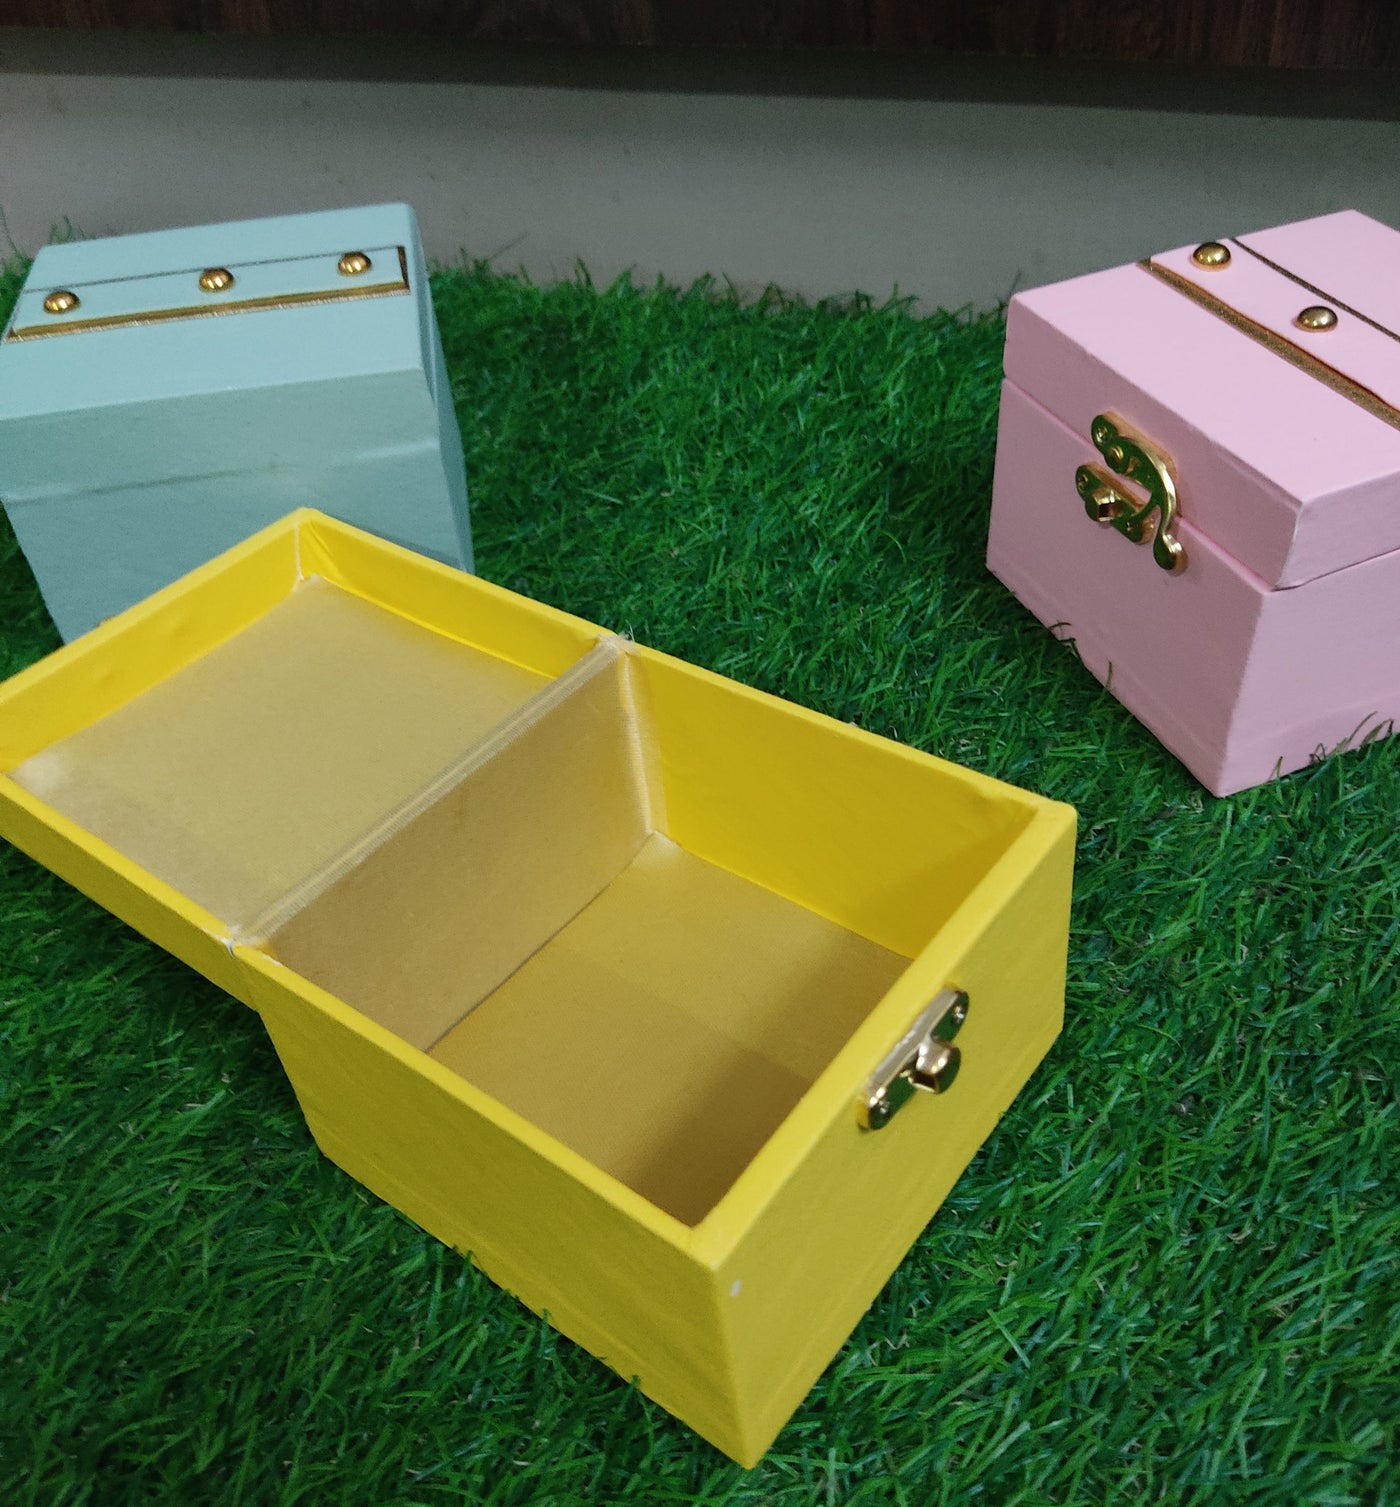 Lamansh leatherite boxes LAMANSH® (4*4 inch) Leather mini trunk boxes for gifting 🎁 / small leatherite lock boxes for wedding favors / Jewellery✨orgainzer box